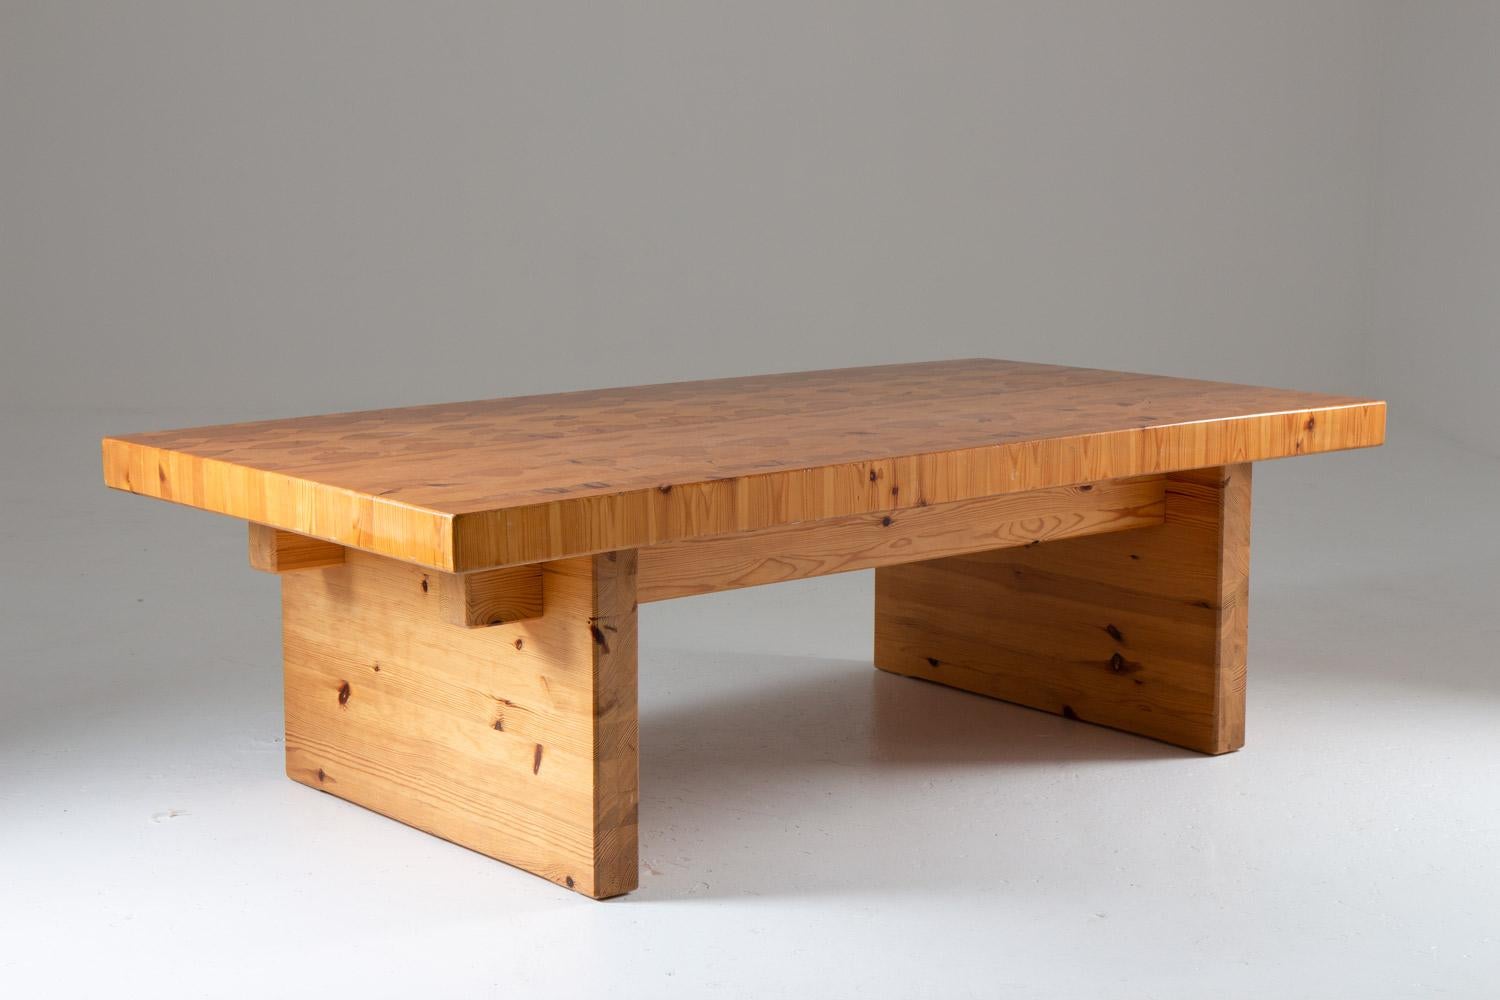 Rare coffee table in pine, most likely manufactured in Sweden, circa 1970.
This table is a great example of the robust pine furniture era that grew popular in Sweden in the late 1960s. The table is made of thick solid pine with a loose tabletop in